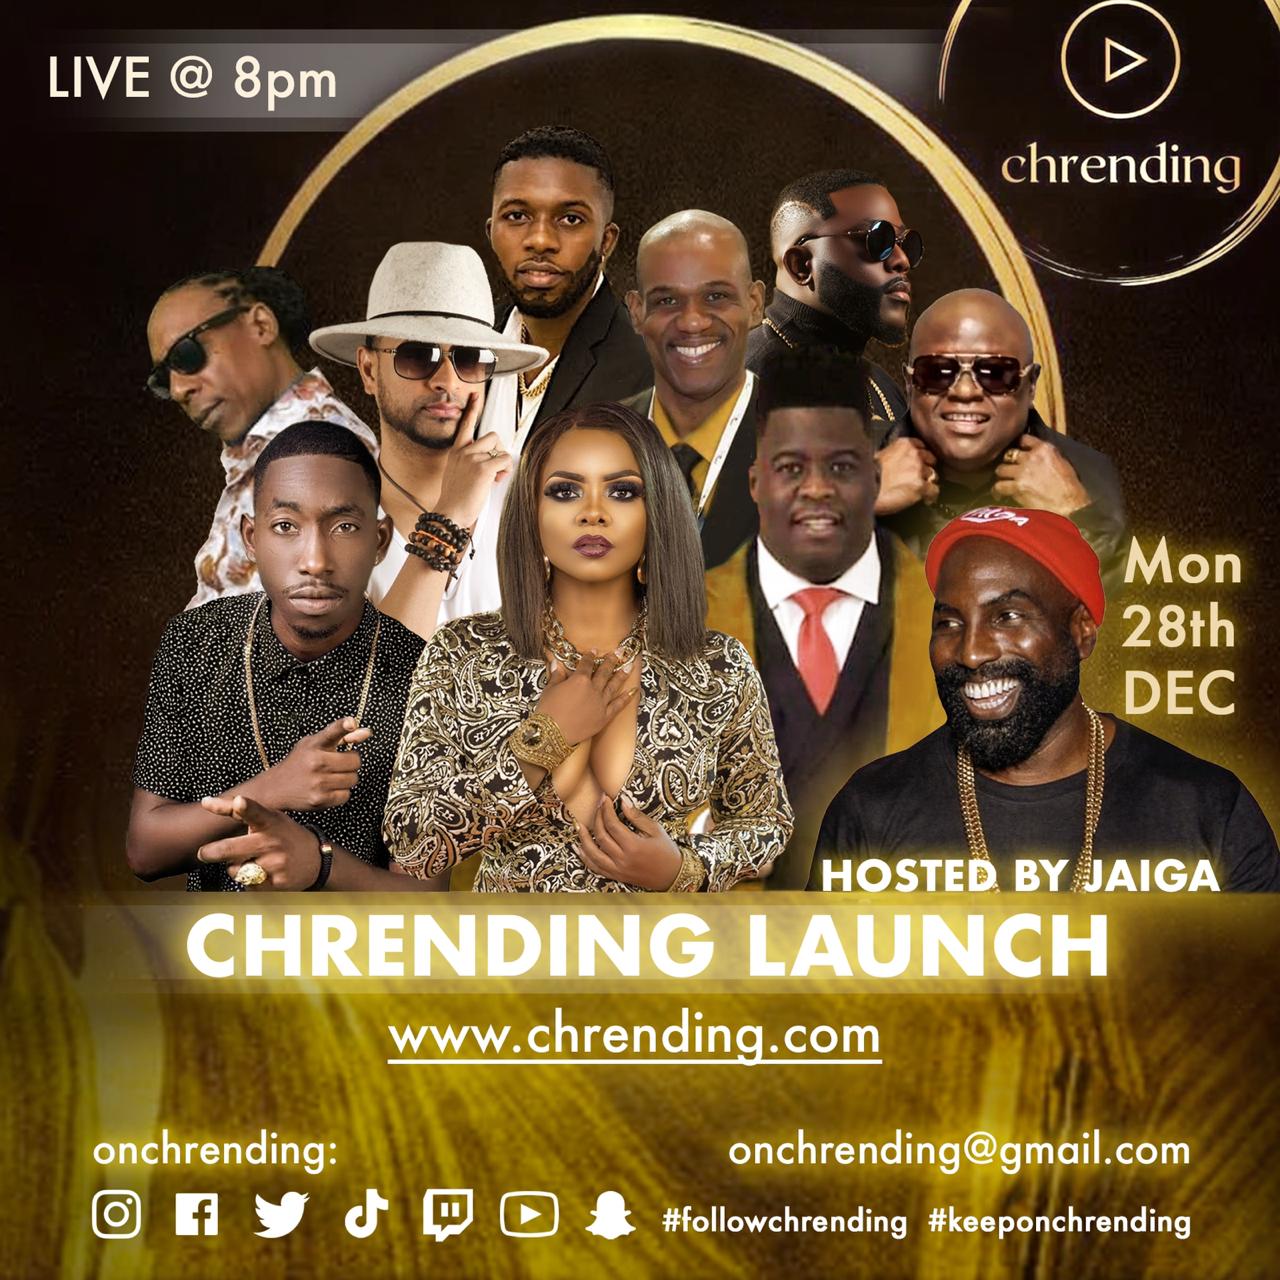 Blaxx and Bitts among stars performing at CHRENDING launch tonight